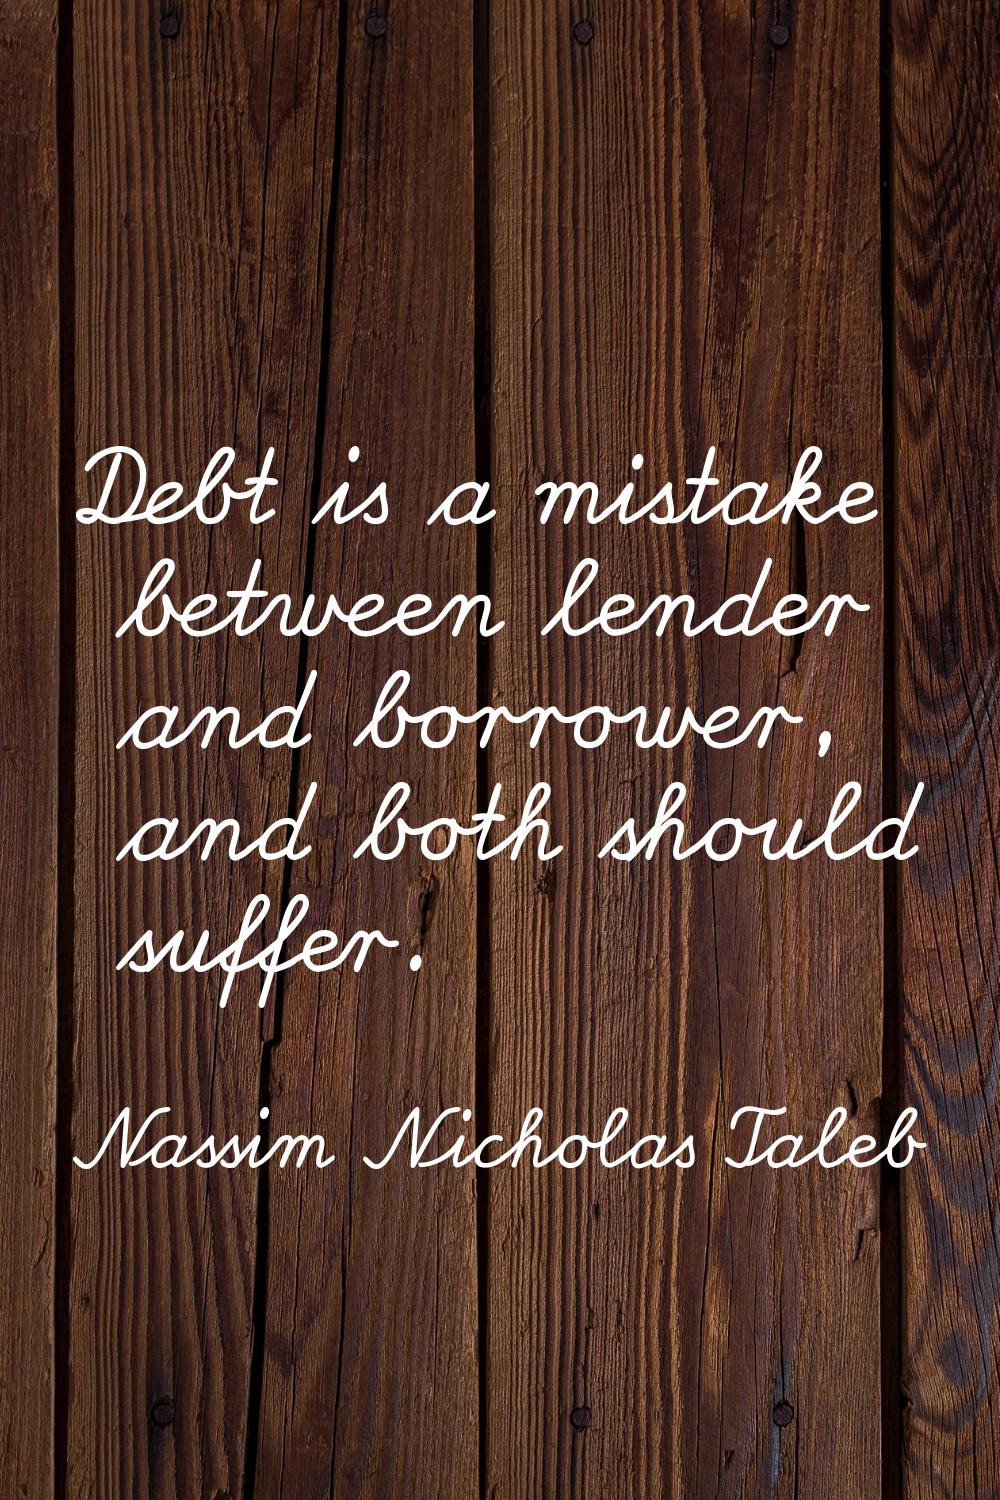 Debt is a mistake between lender and borrower, and both should suffer.